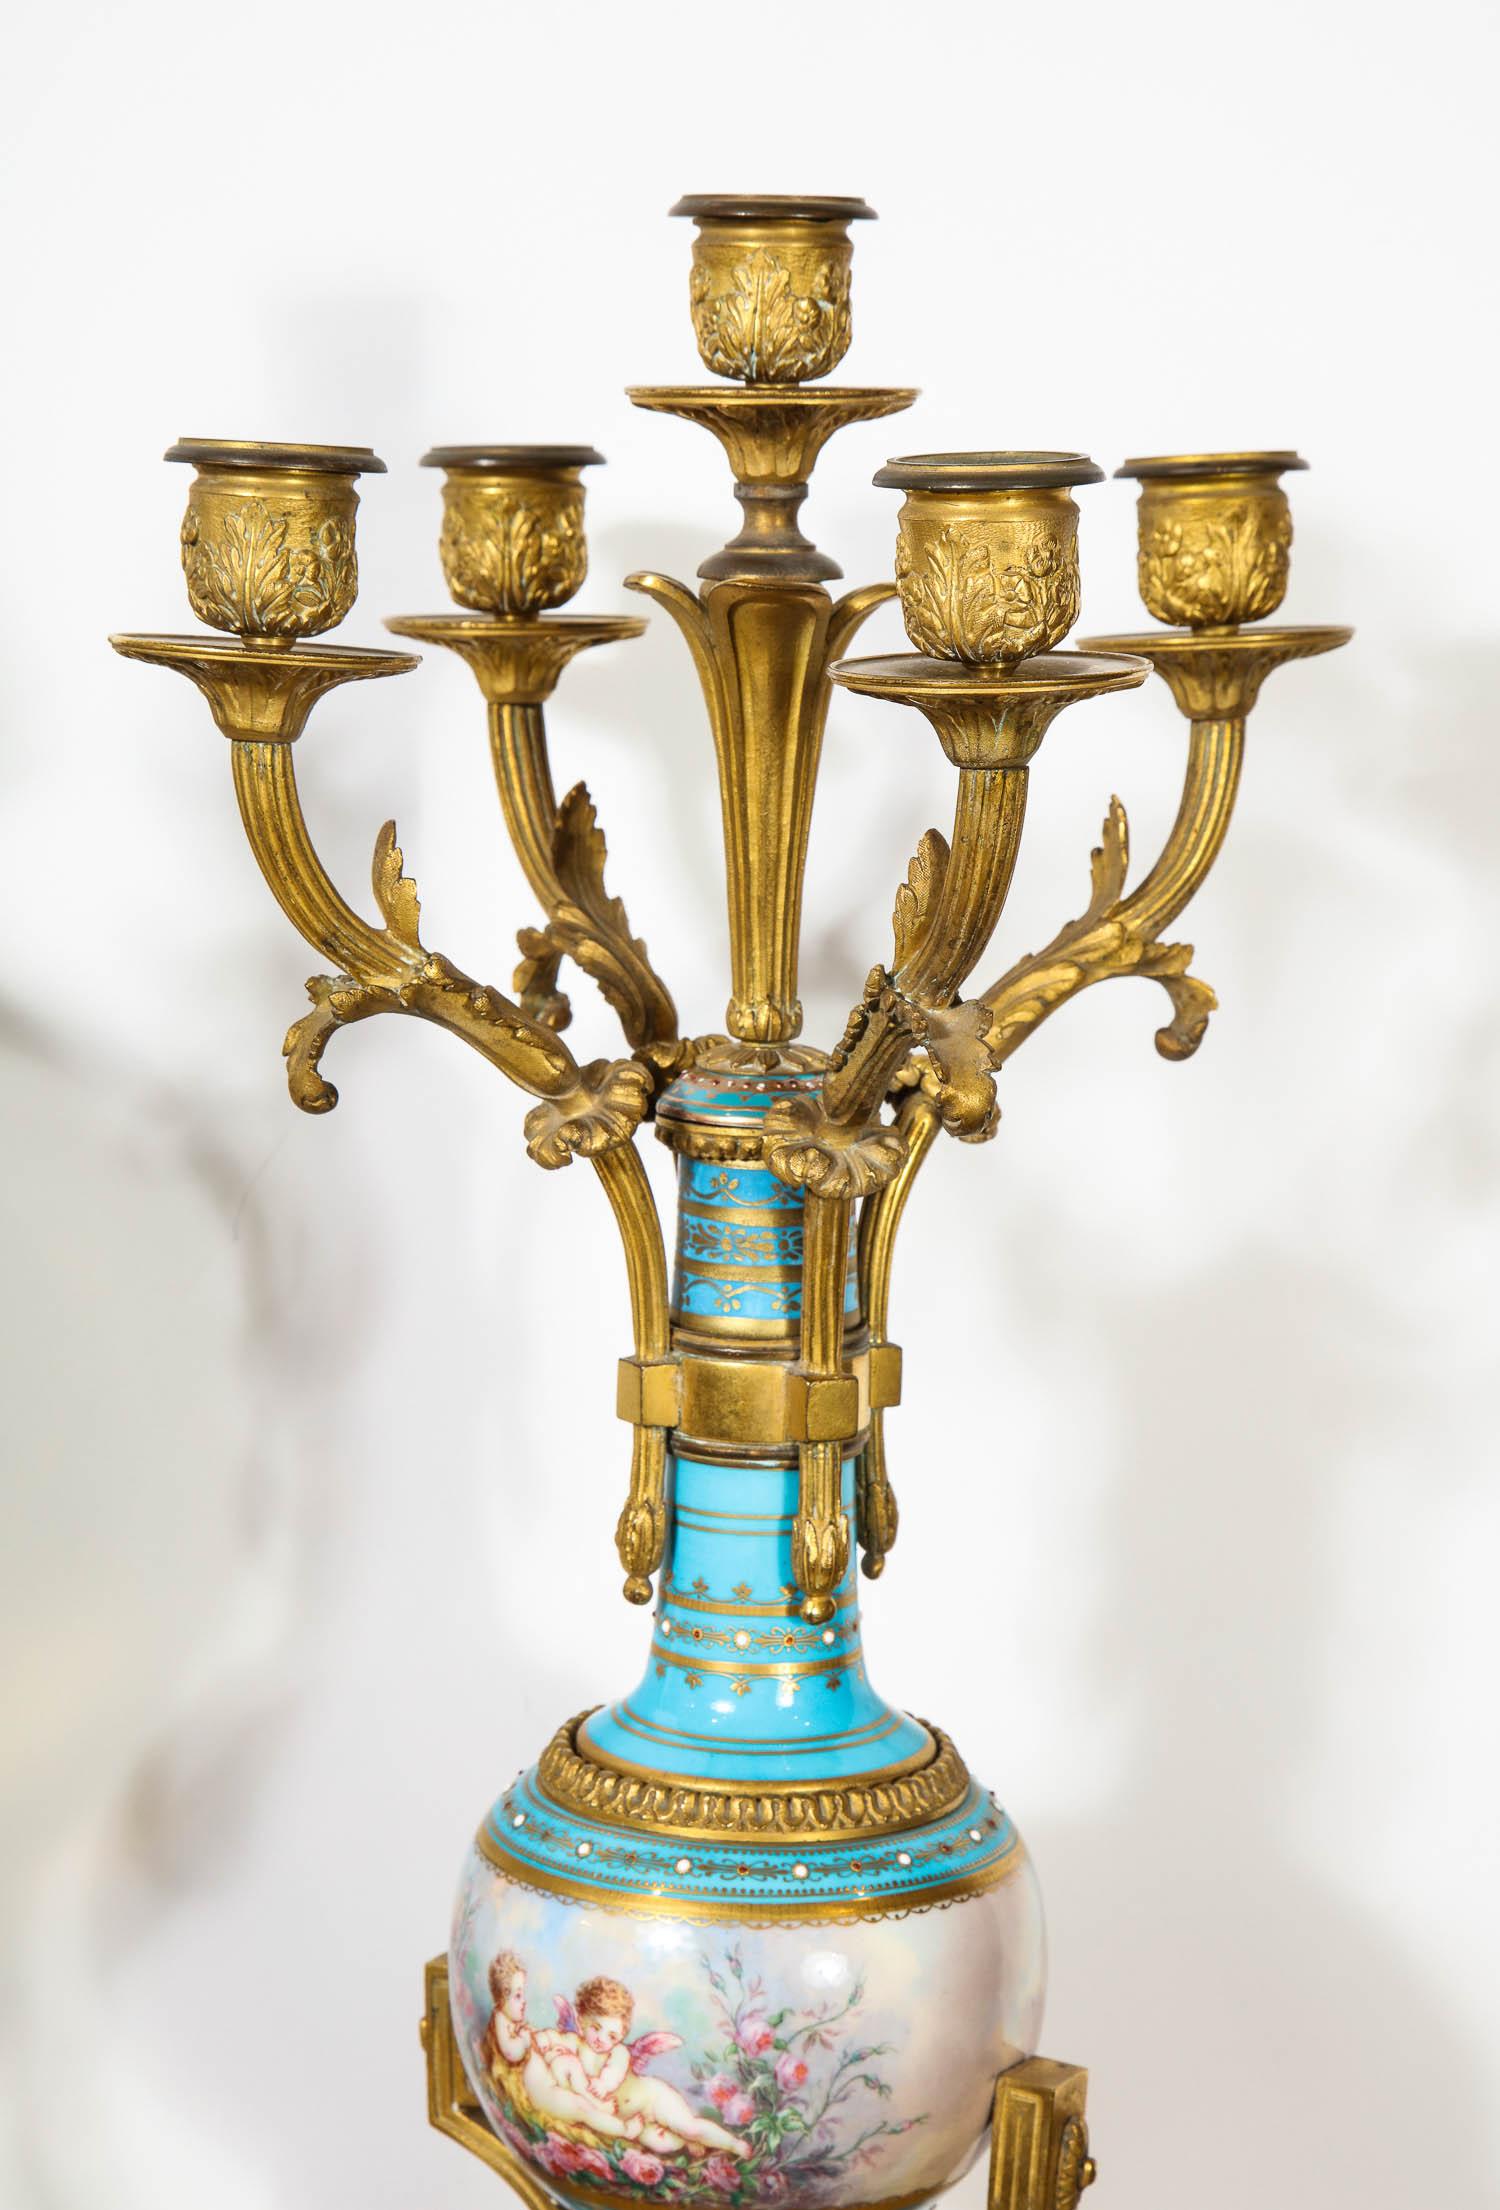 Exceptional French Ormolu-Mounted Turquoise Jeweled Sevres Porcelain Clock Set For Sale 4